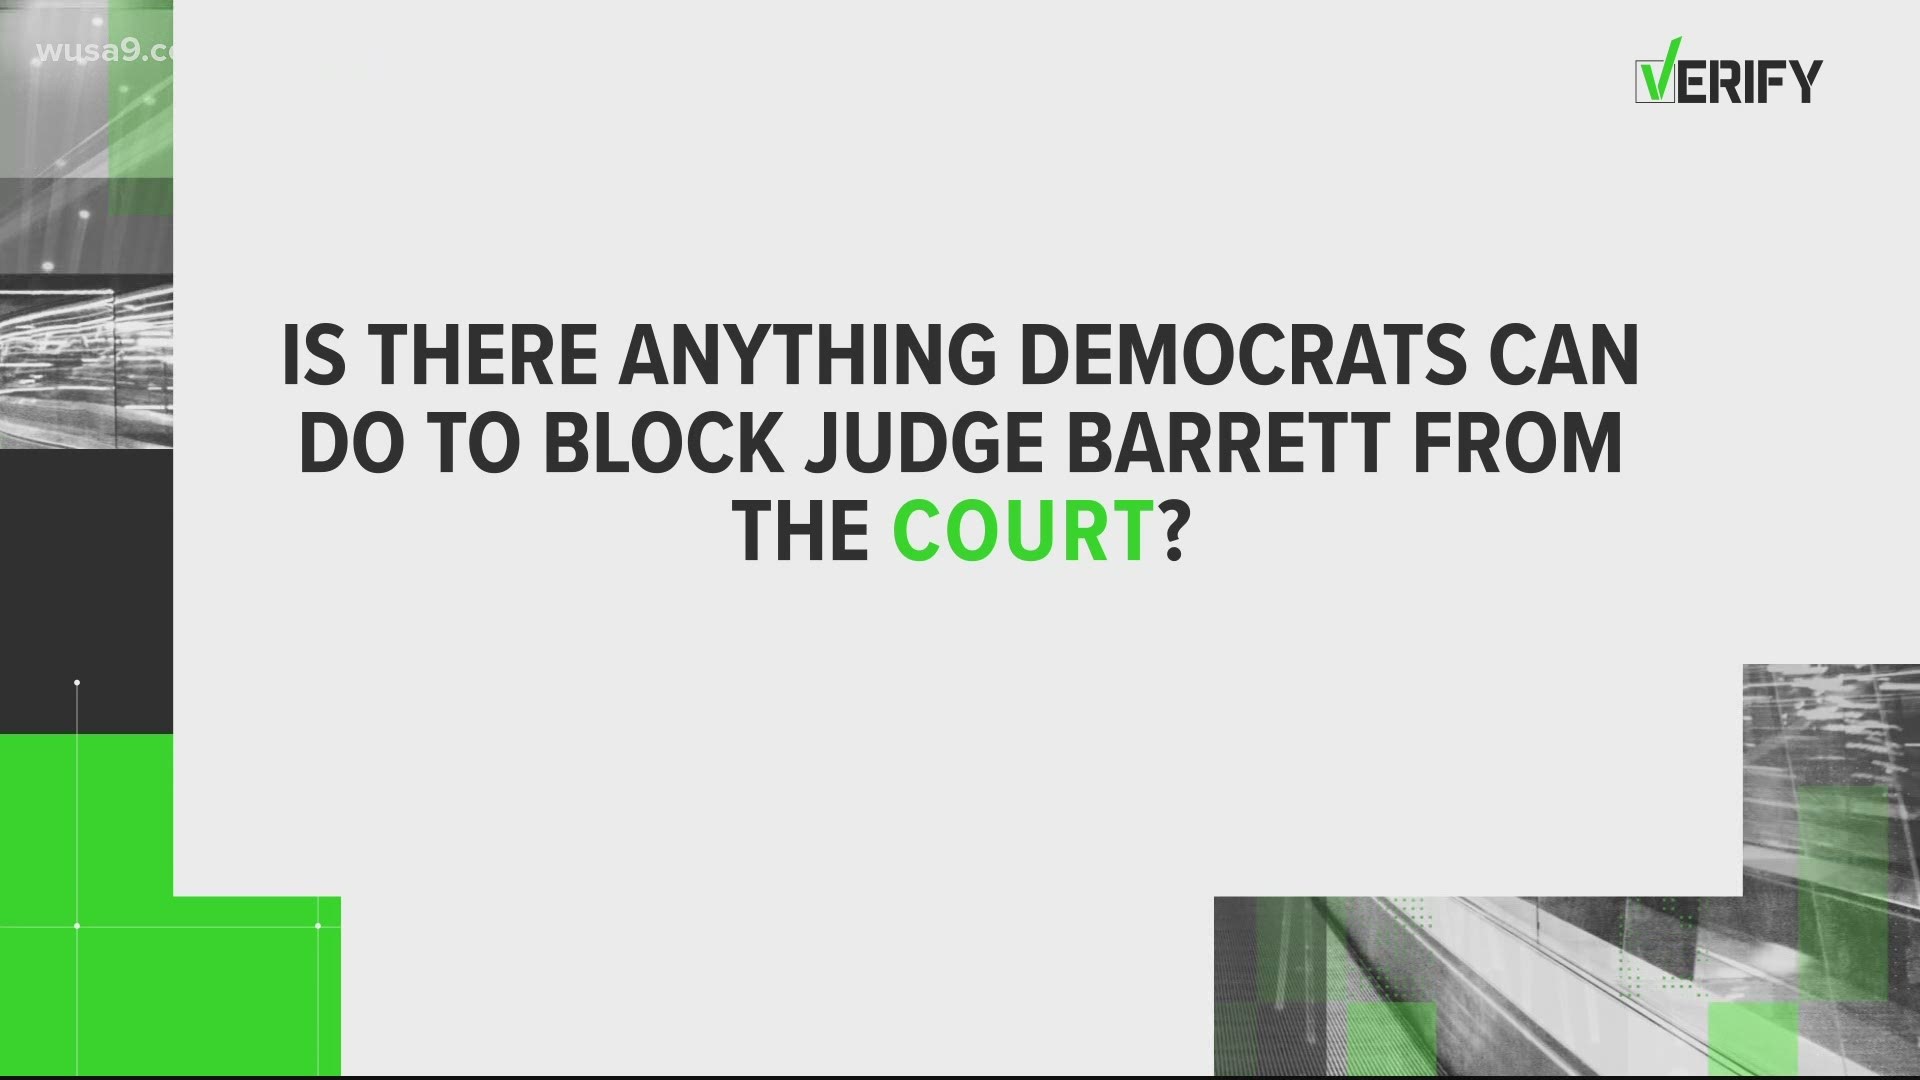 Democratic members of Congress say they have options left to block the nominee for the Supreme Court. Our experts say what is left is mostly stalling tactics.